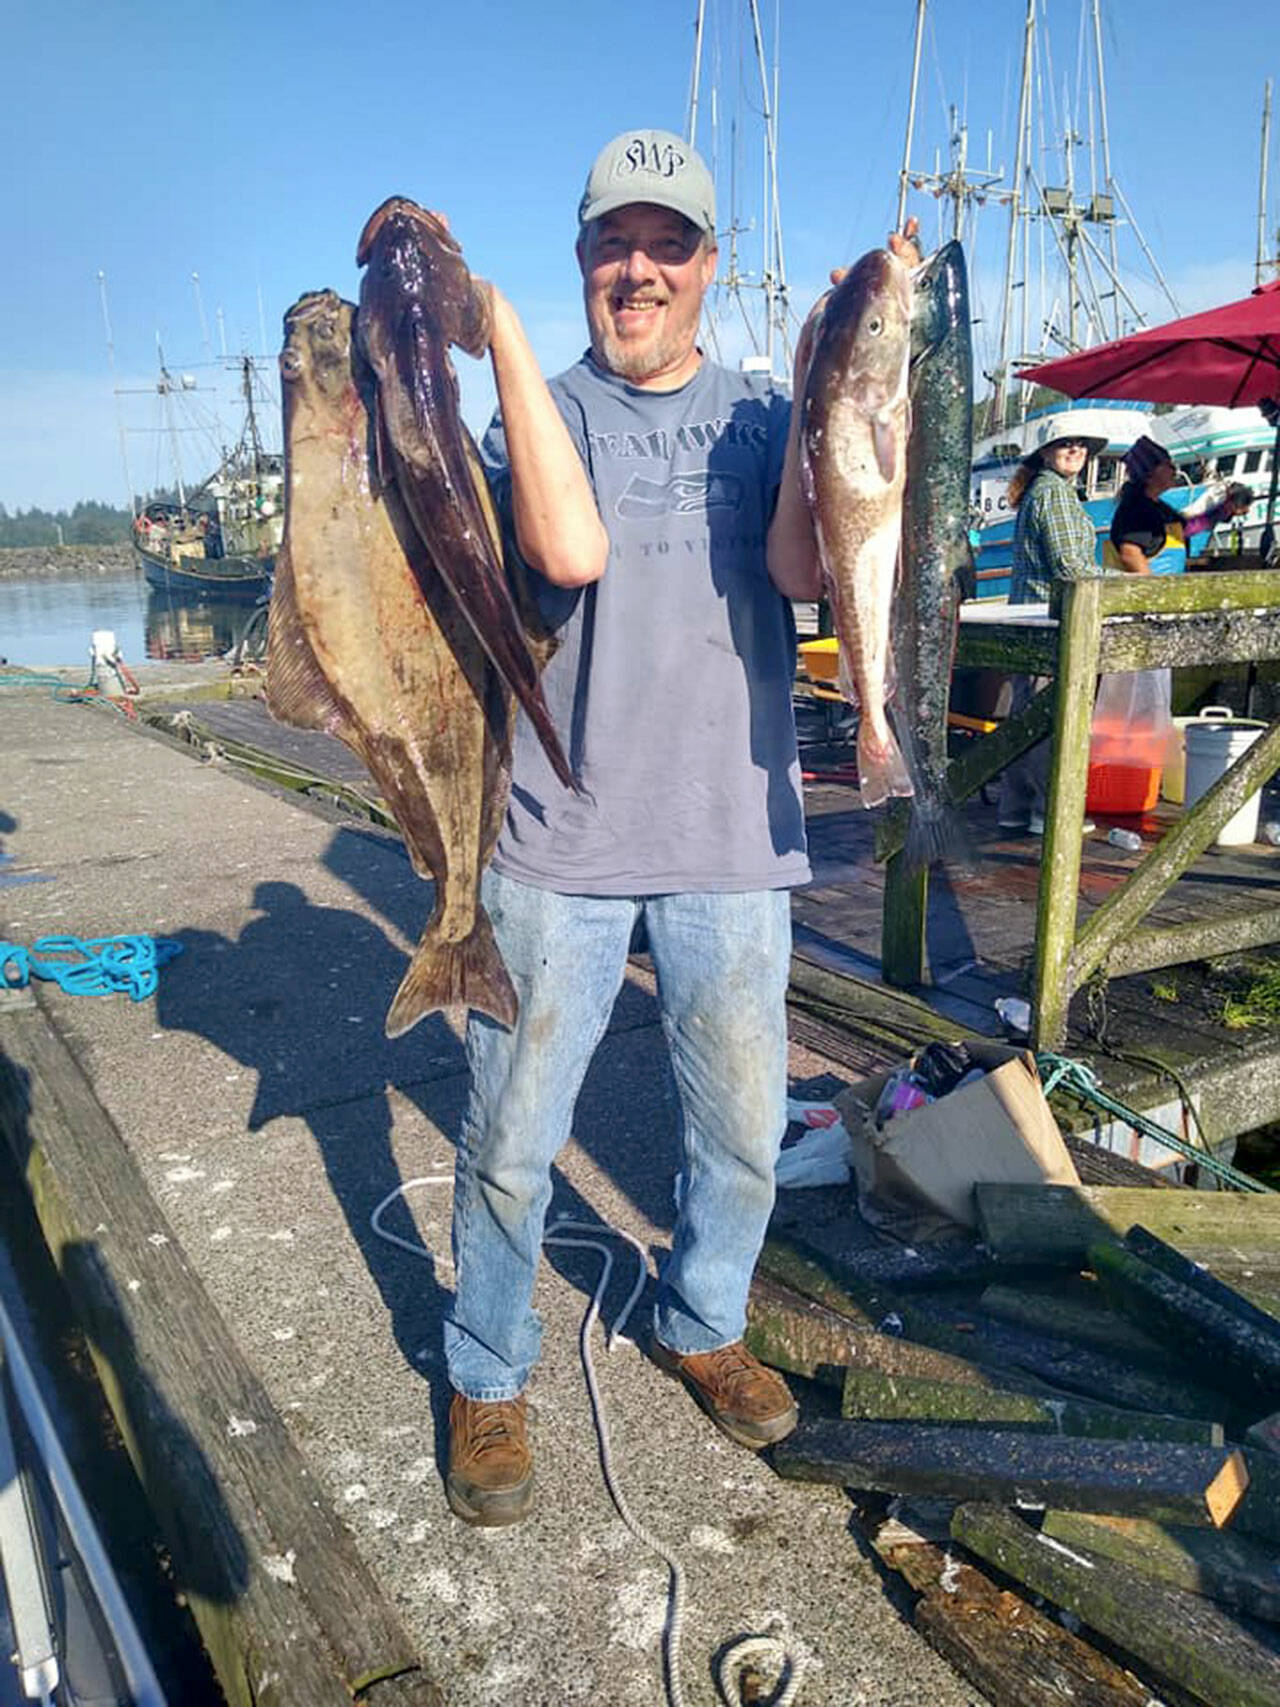 Federal Way angler James Tift had a mess of success fishing offshore at Swiftsure Bank in Marine Area 4 (Neah Bay) on Thursday. Tift limited on hatchery coho while catching a halibut, a lingcod and rockfish.